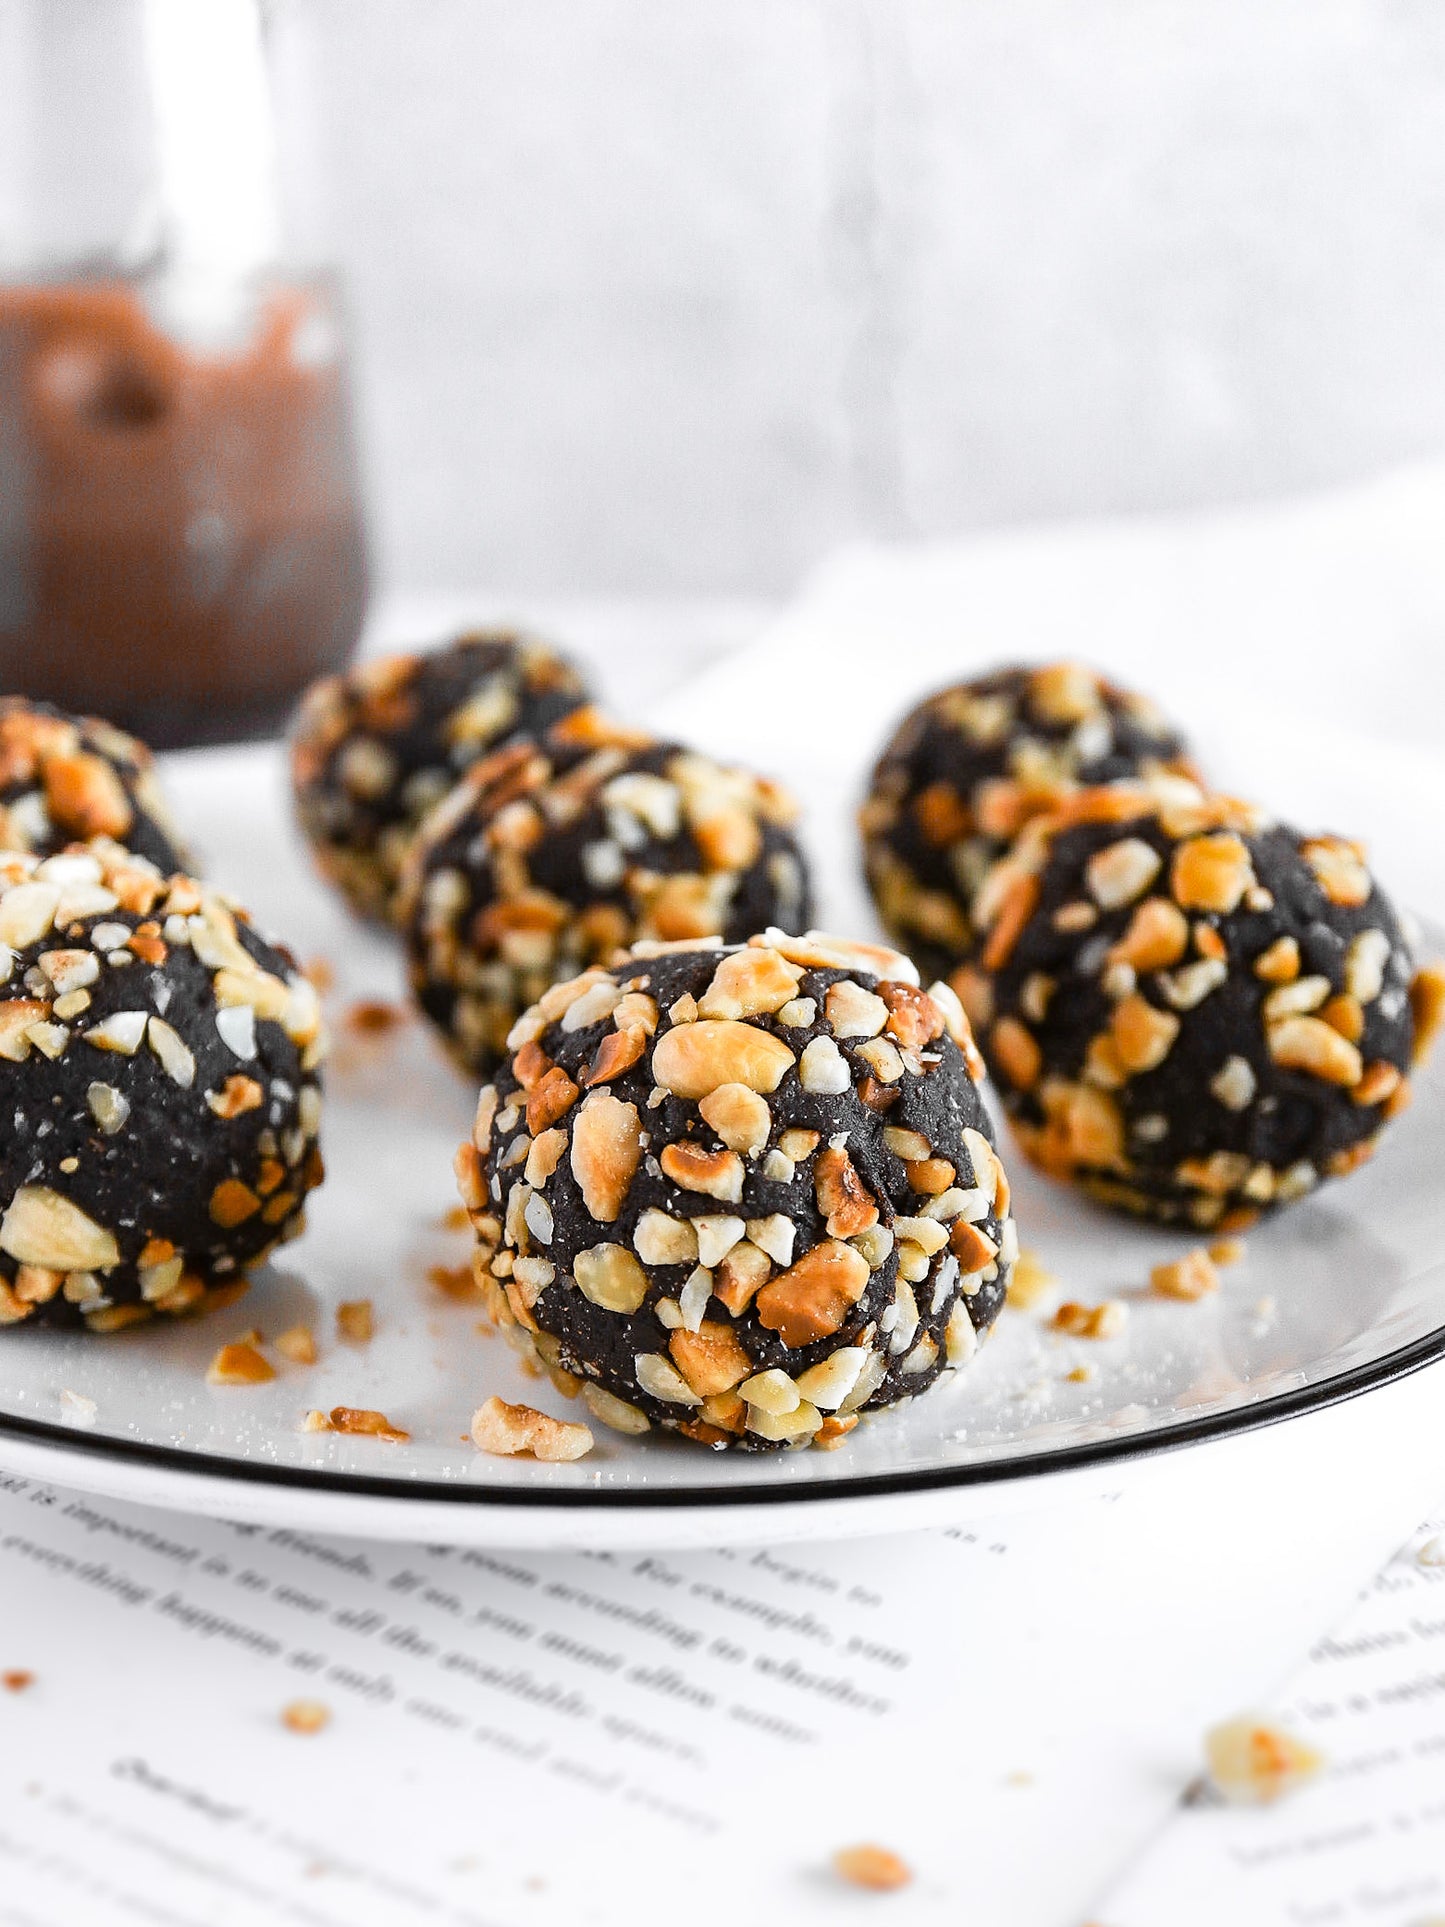 Nutella Bomb Pea Protein Balls (available in sugar-free chocolate coating)